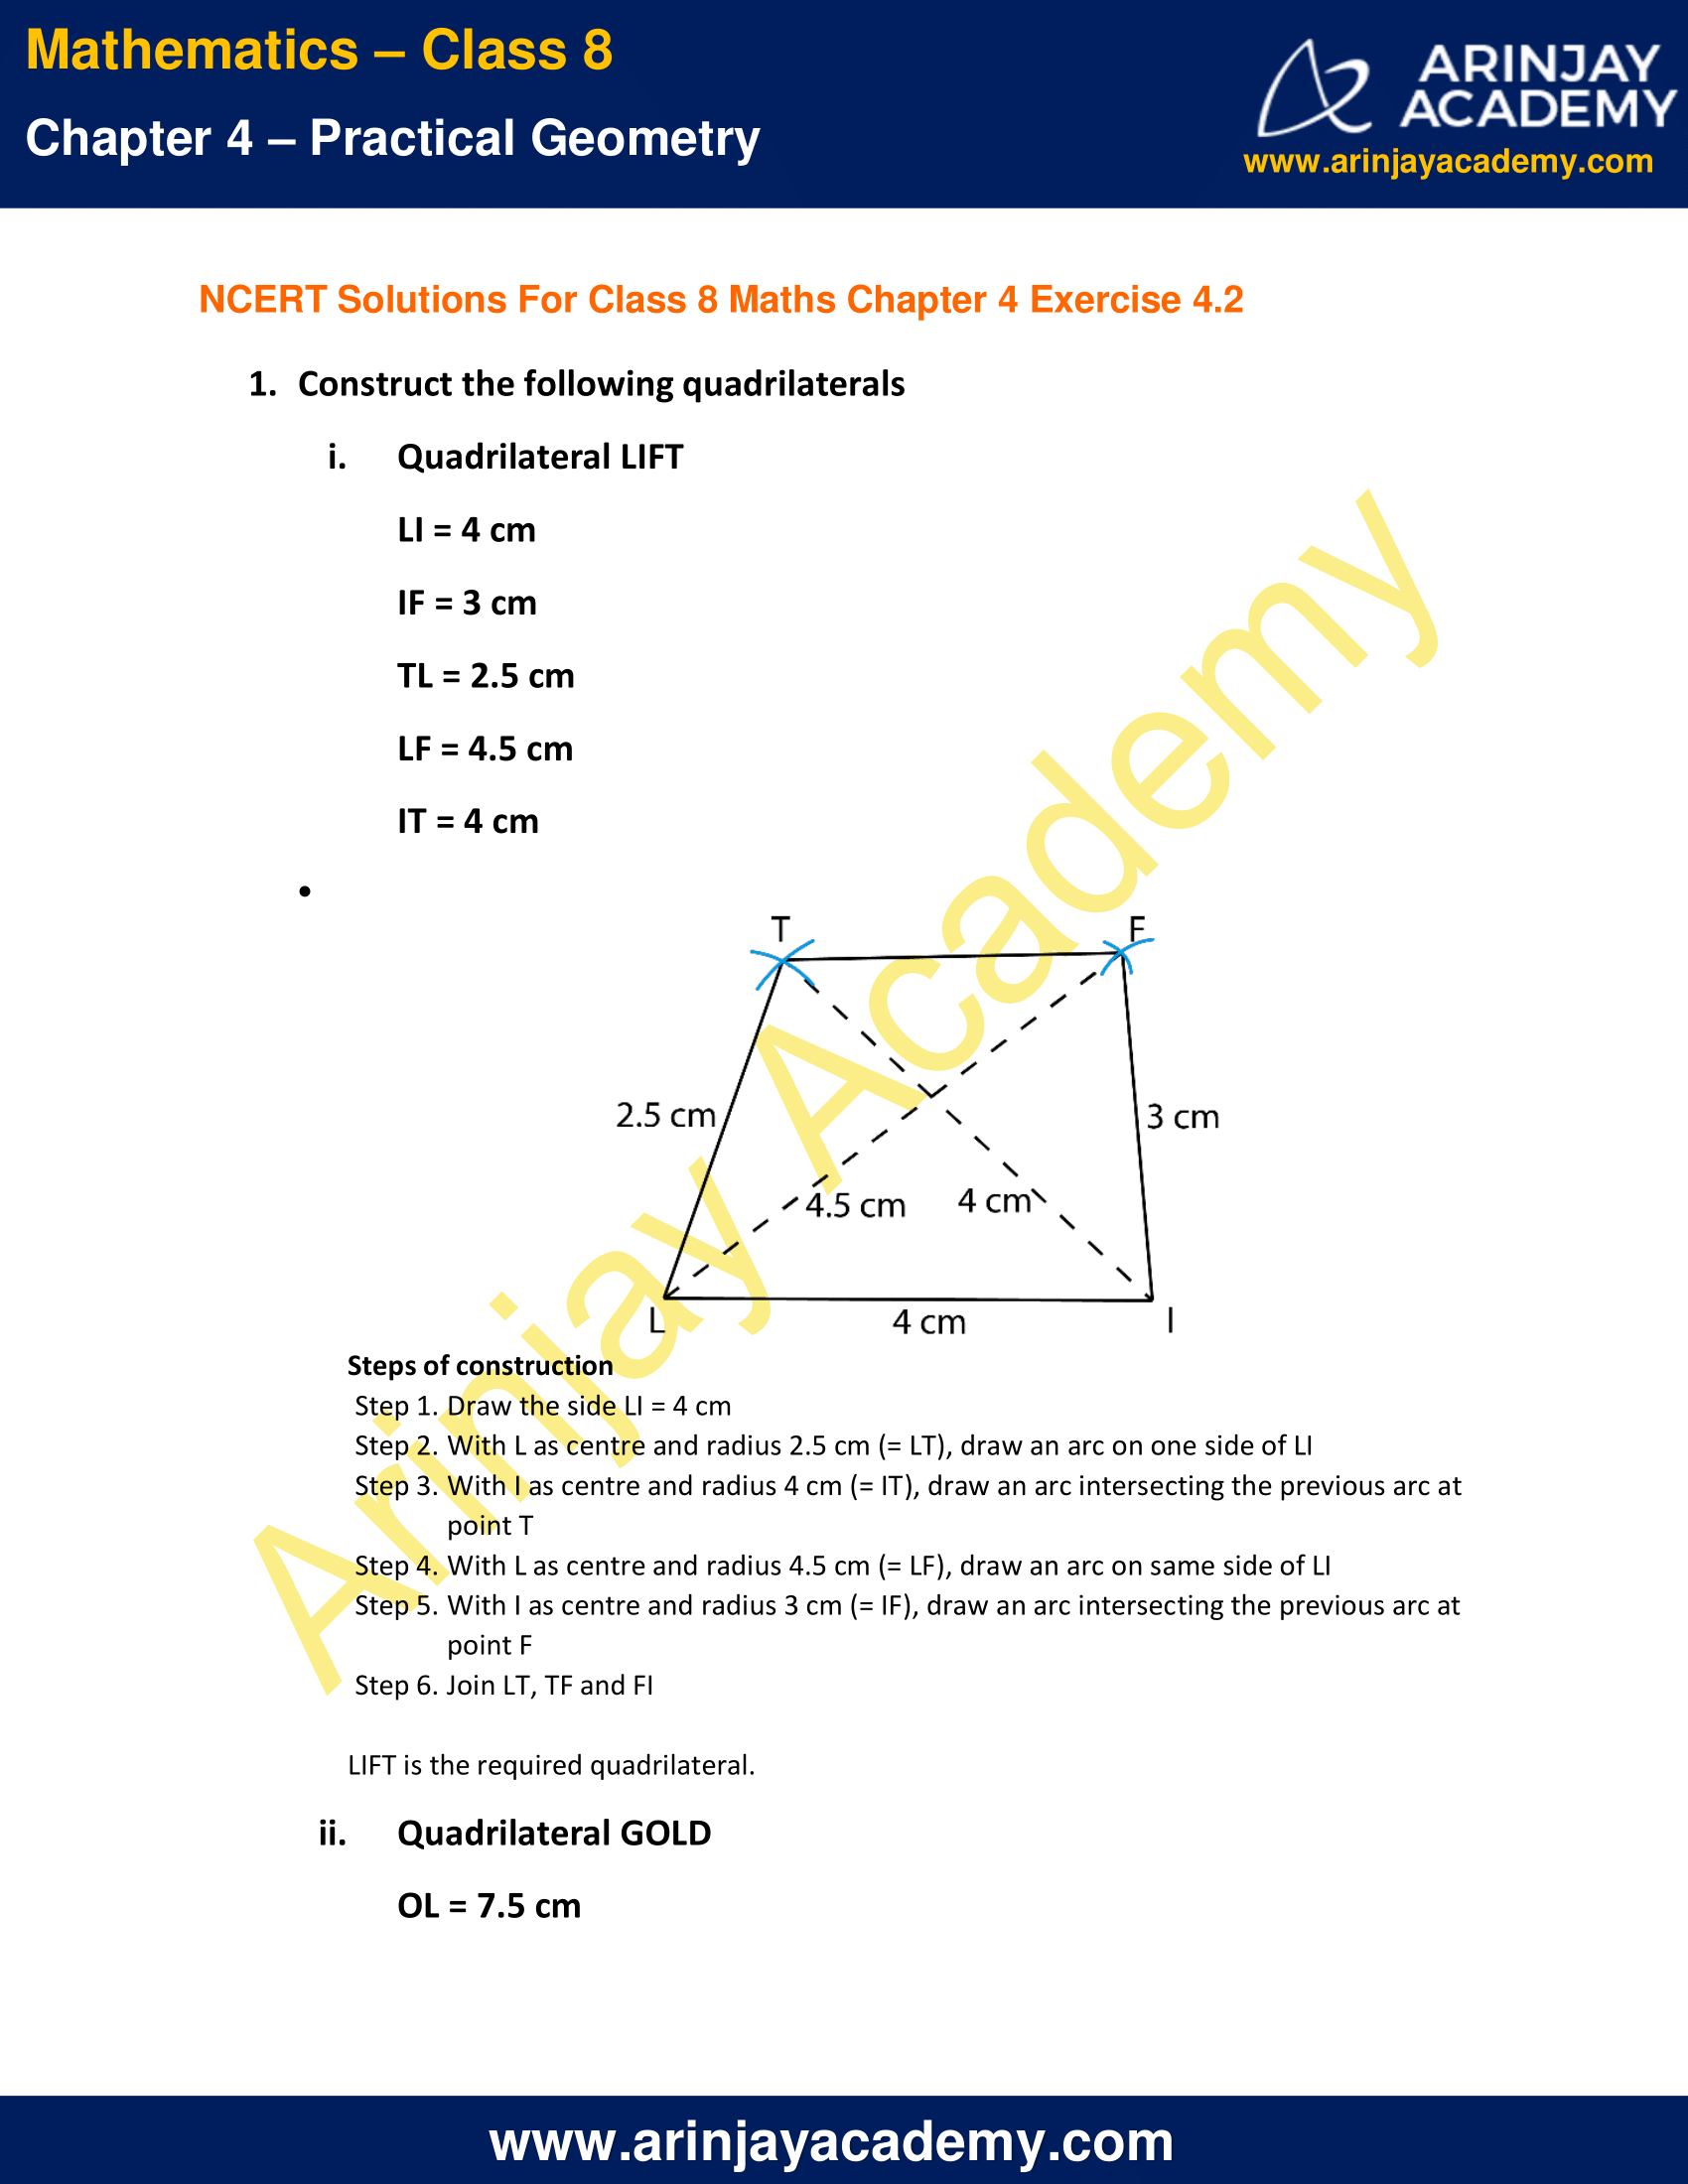 NCERT Solutions for Class 8 Maths Chapter 4 Exercise 4.2 image 1